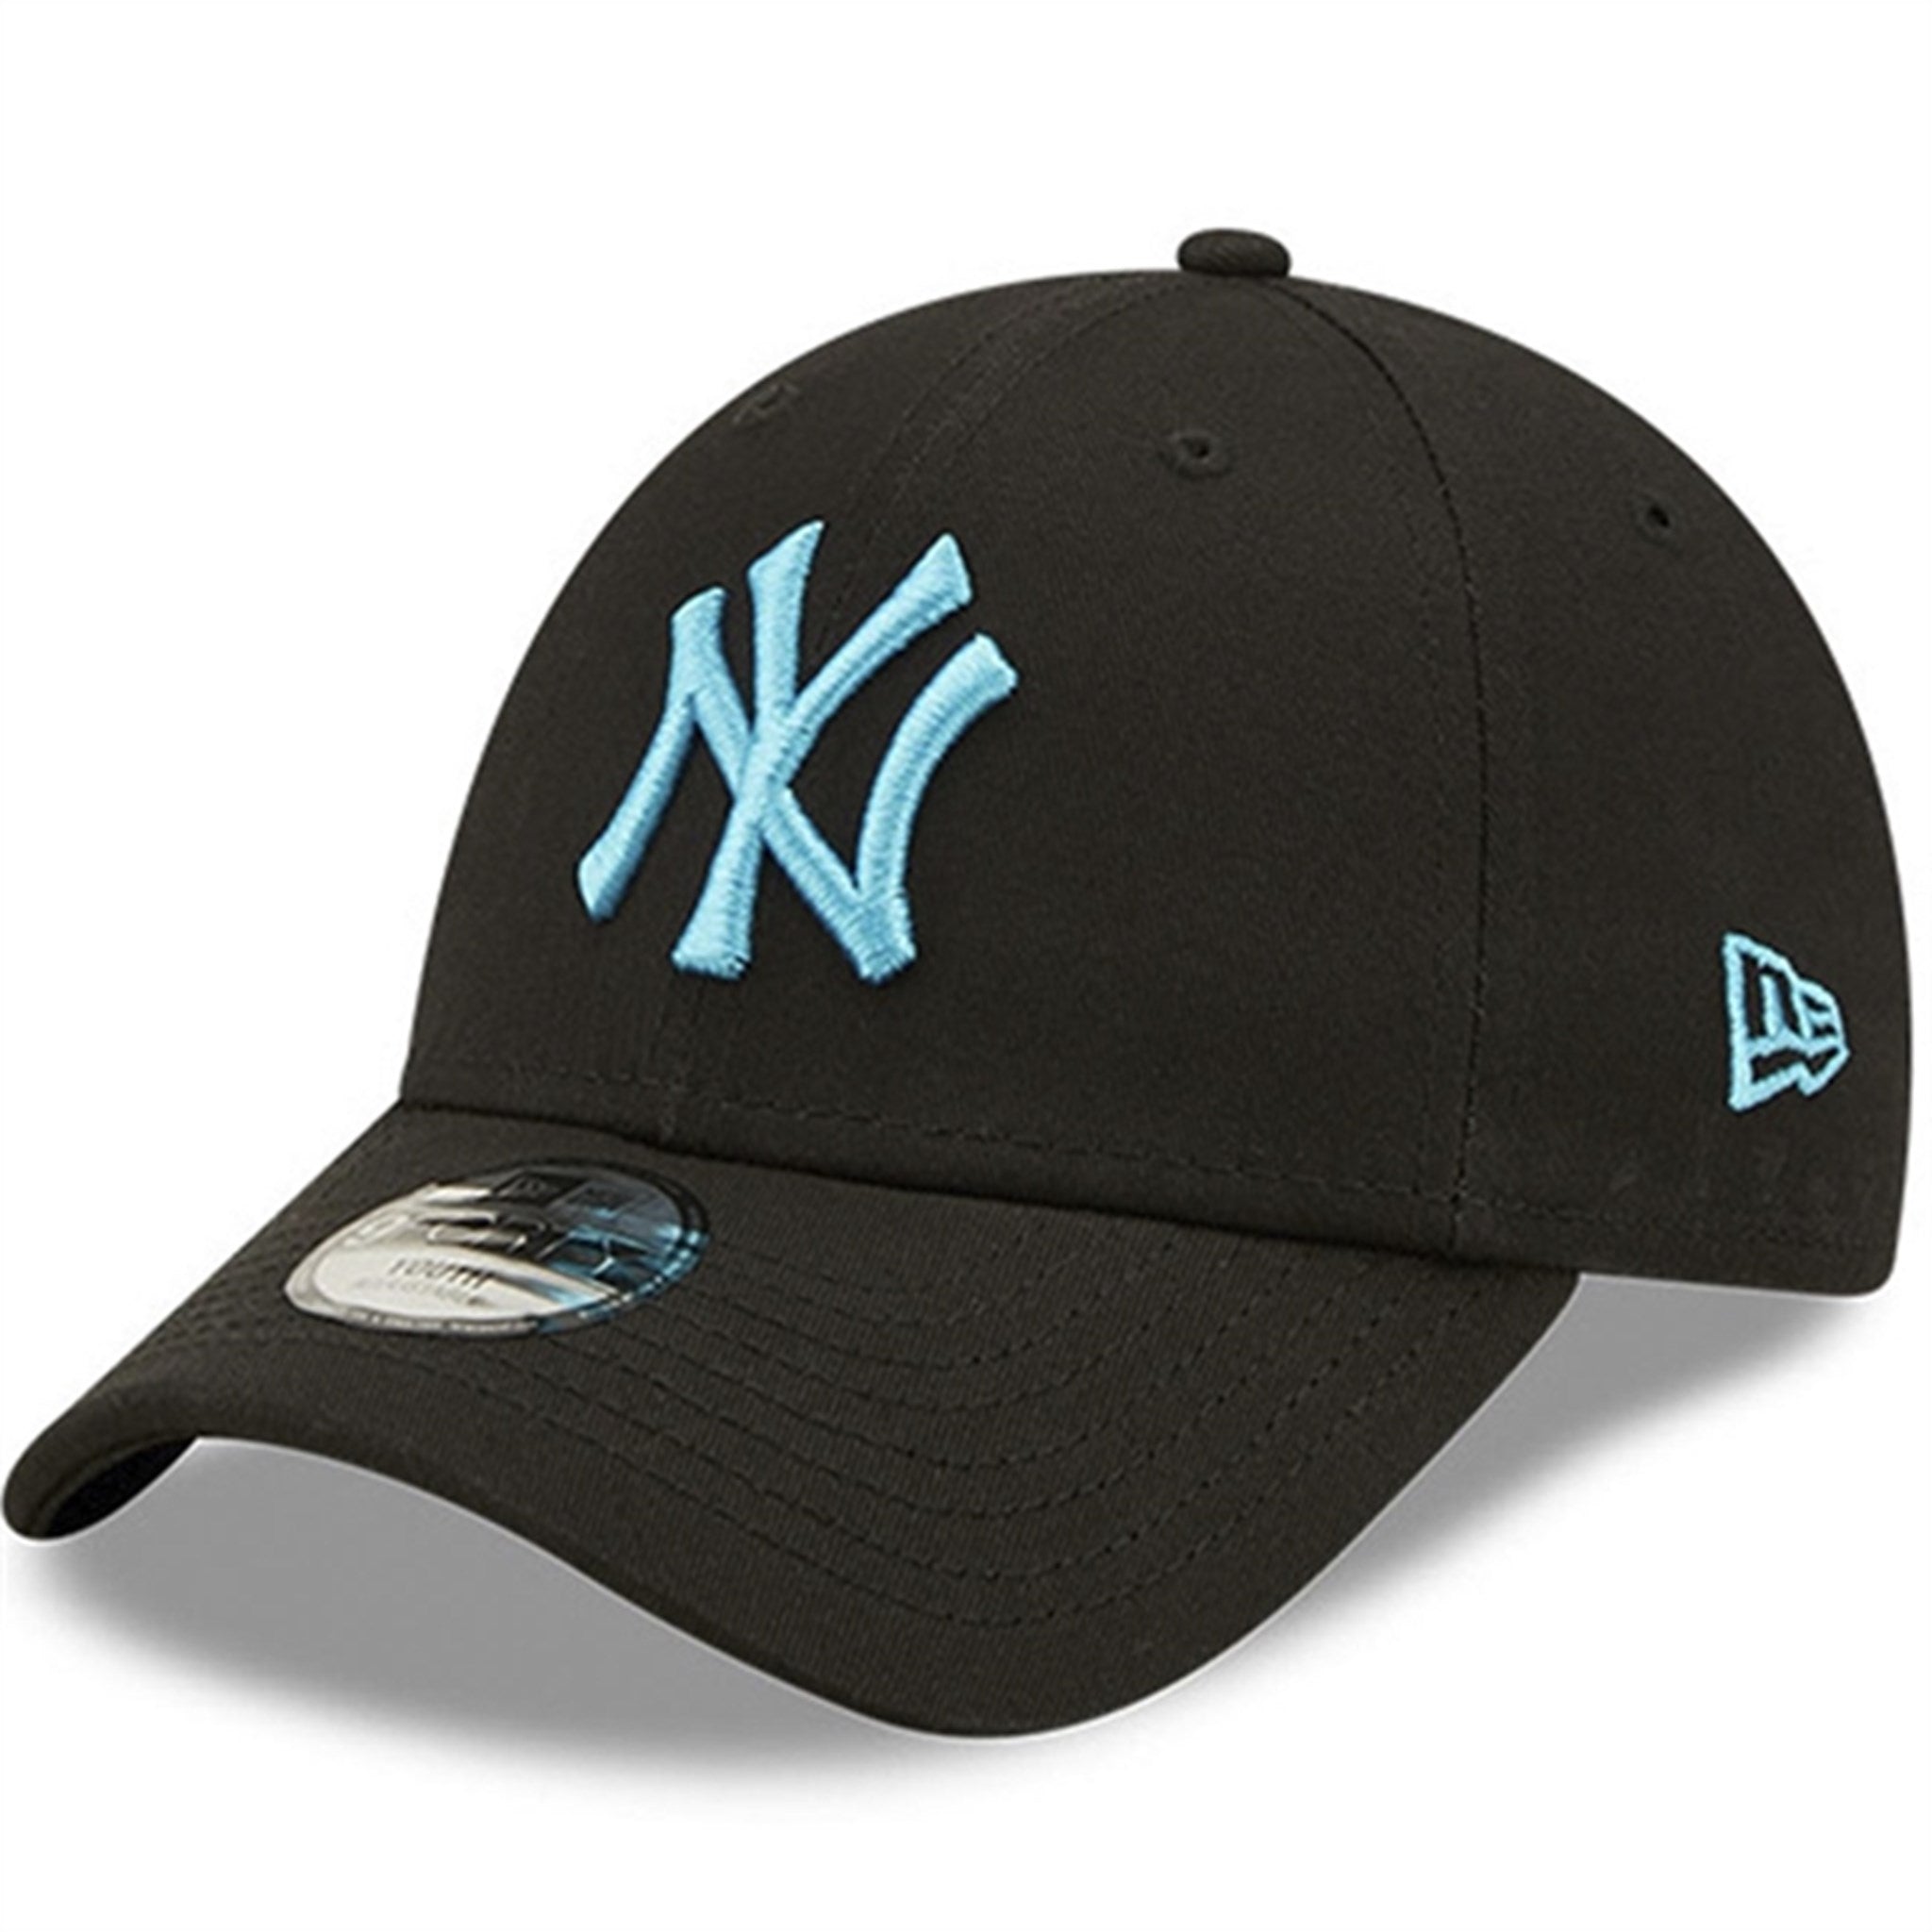 NEW ERA CHYT Neon Pack 9Forty Cap Black